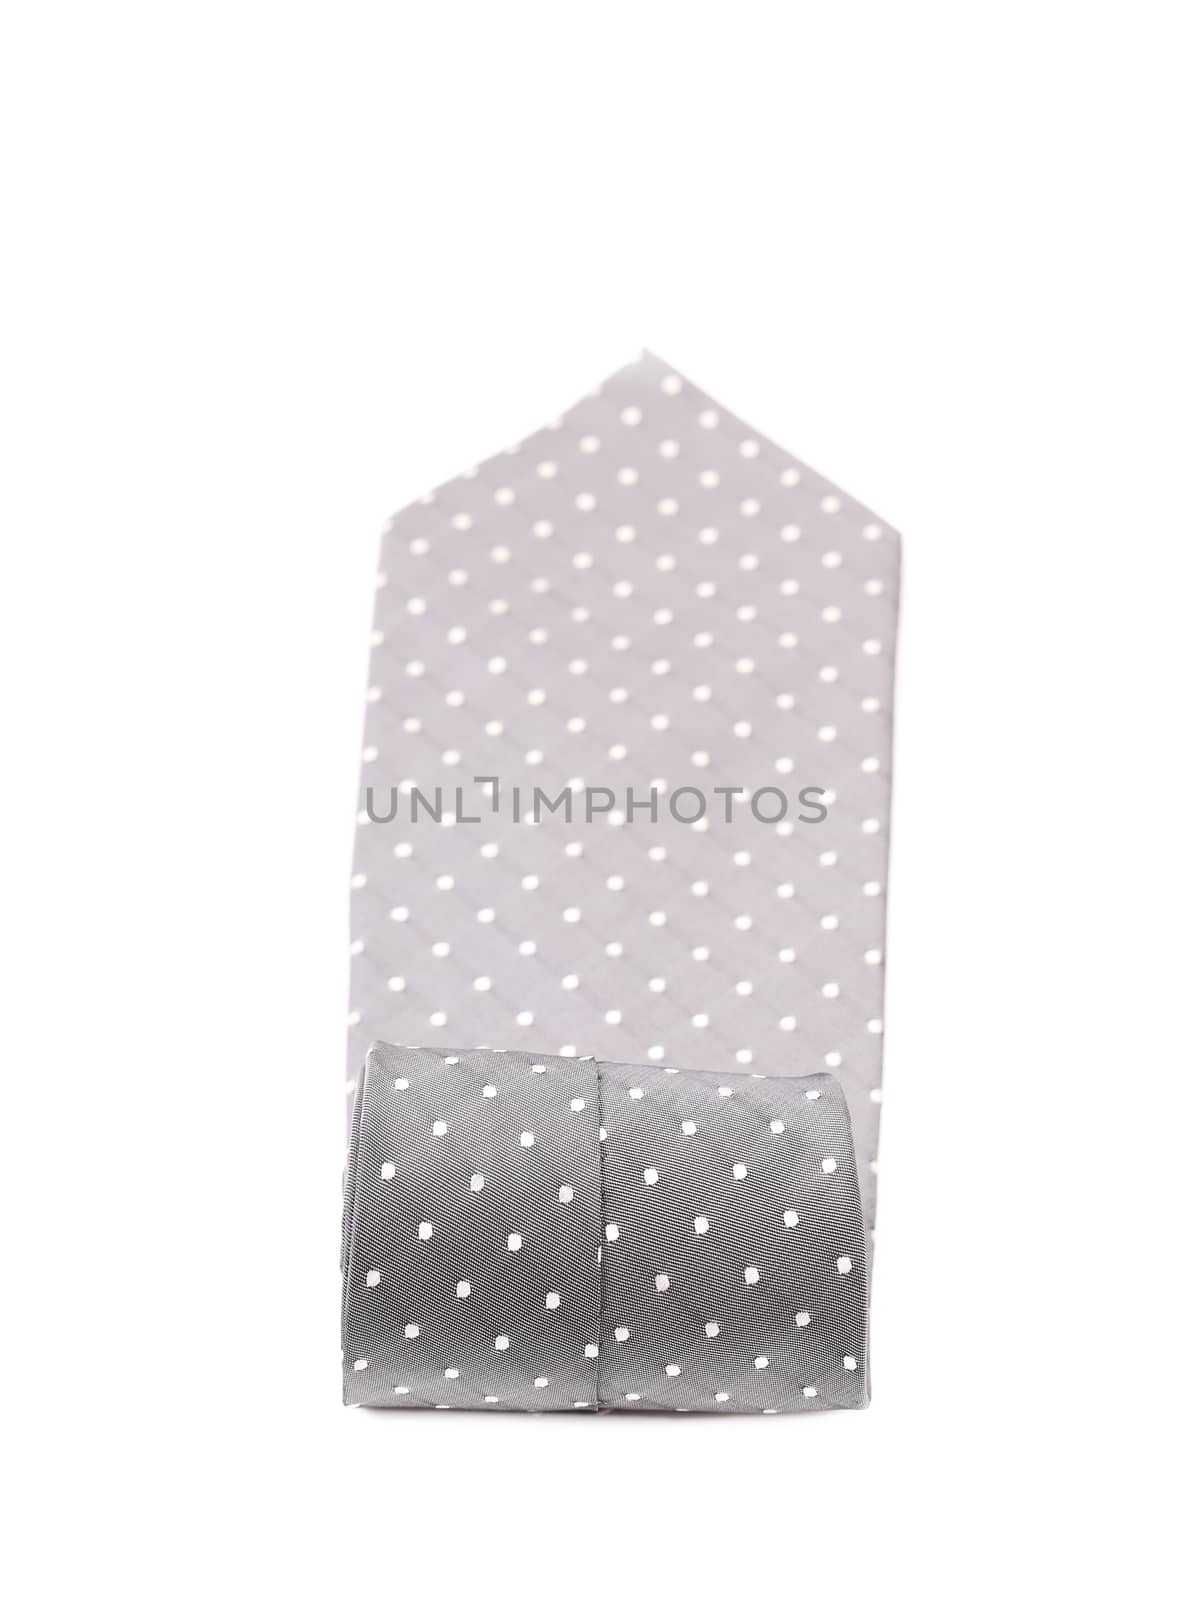 Folded gray tie with white speck. by indigolotos